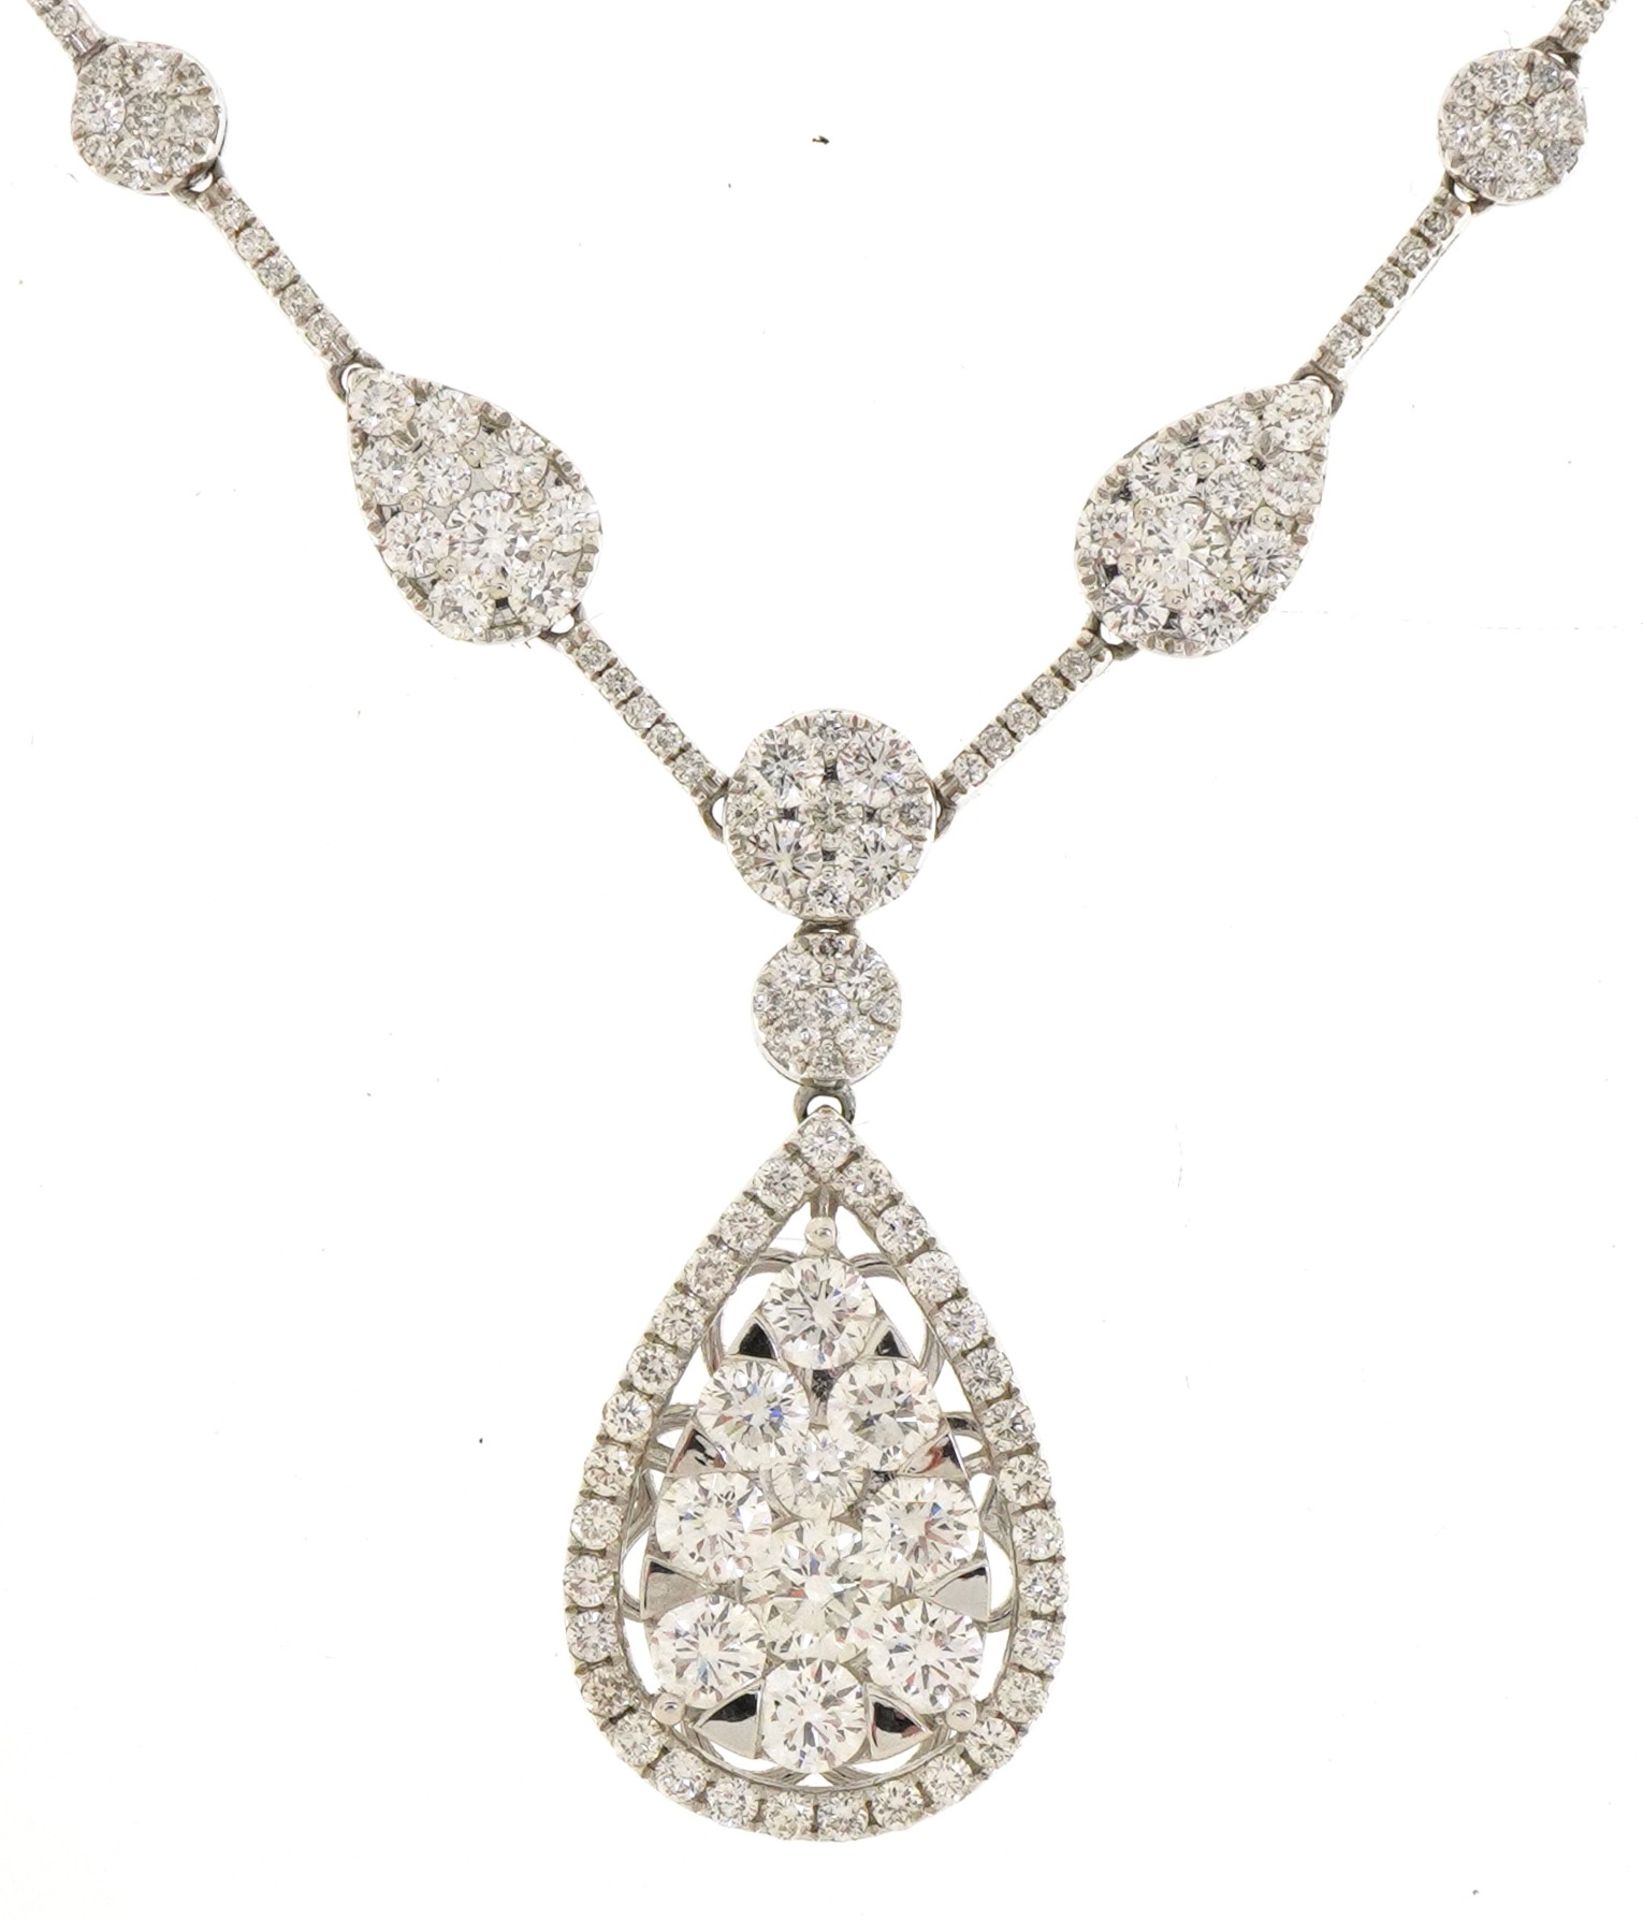 18ct white gold graduating Riviere diamond collar necklace with teardrop cluster set with three